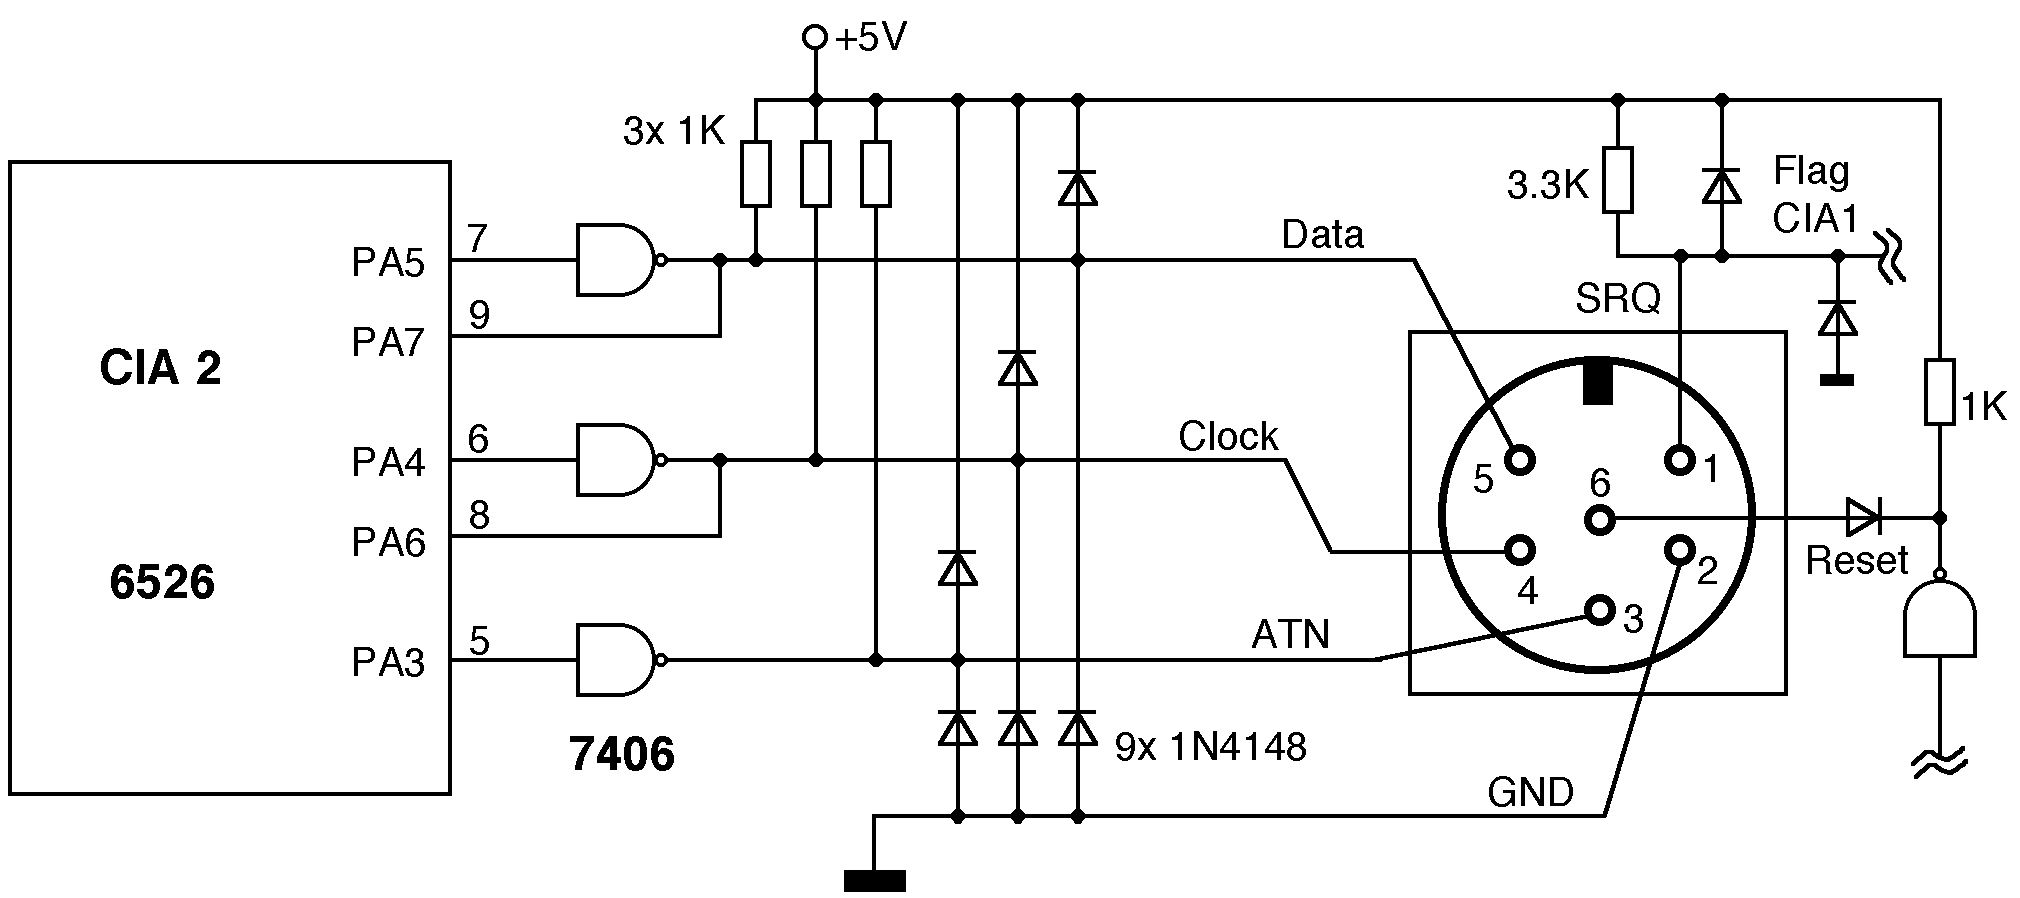 [picture of serial bus circuitry]